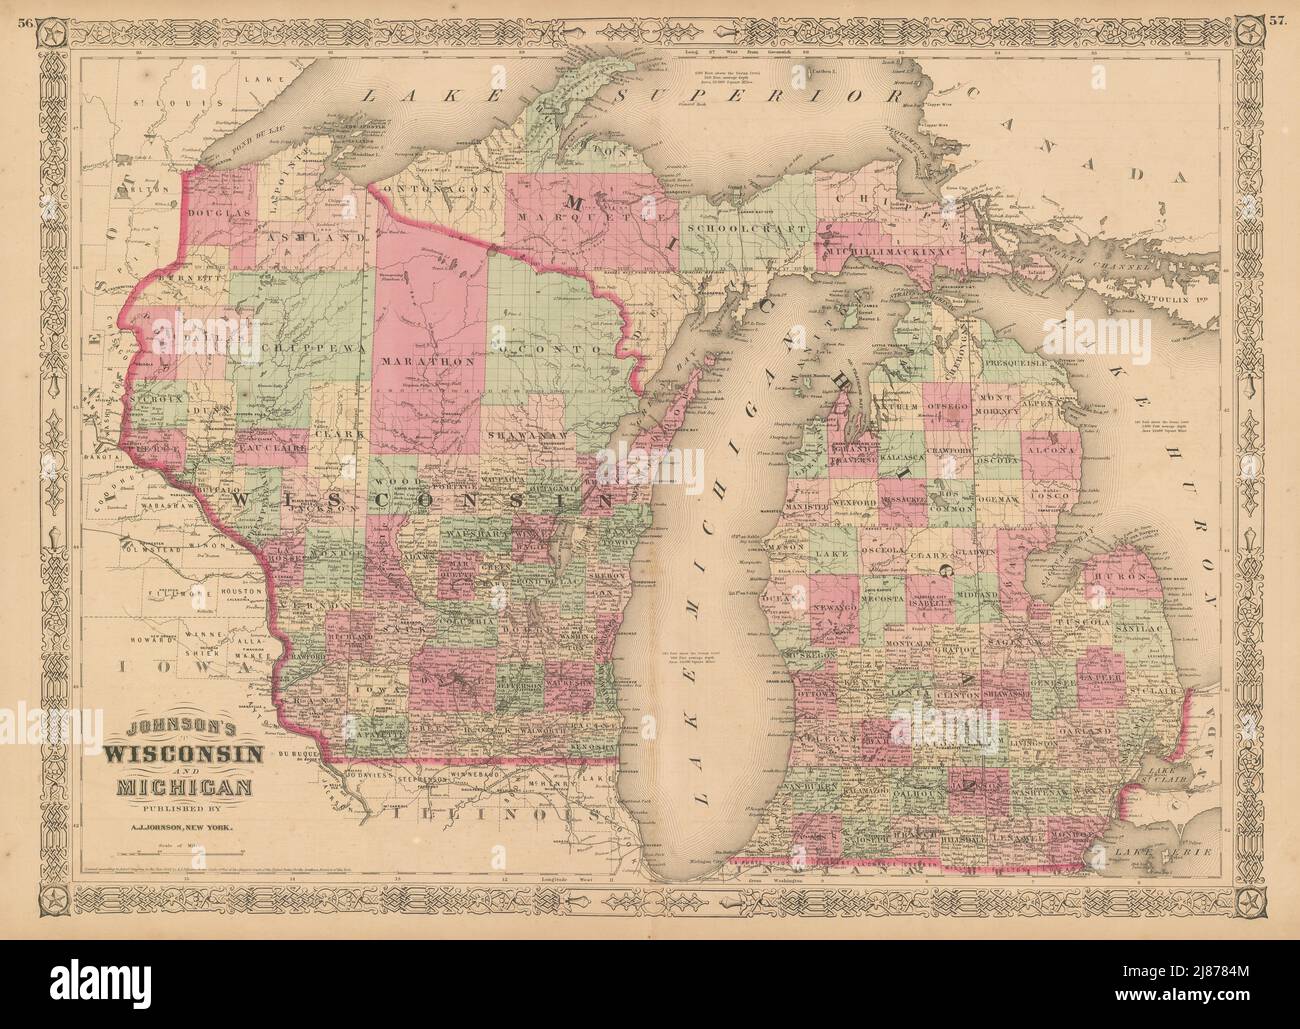 Johnson's Wisconsin & Michigan. State map showing counties. Great Lakes 1867 Stock Photo